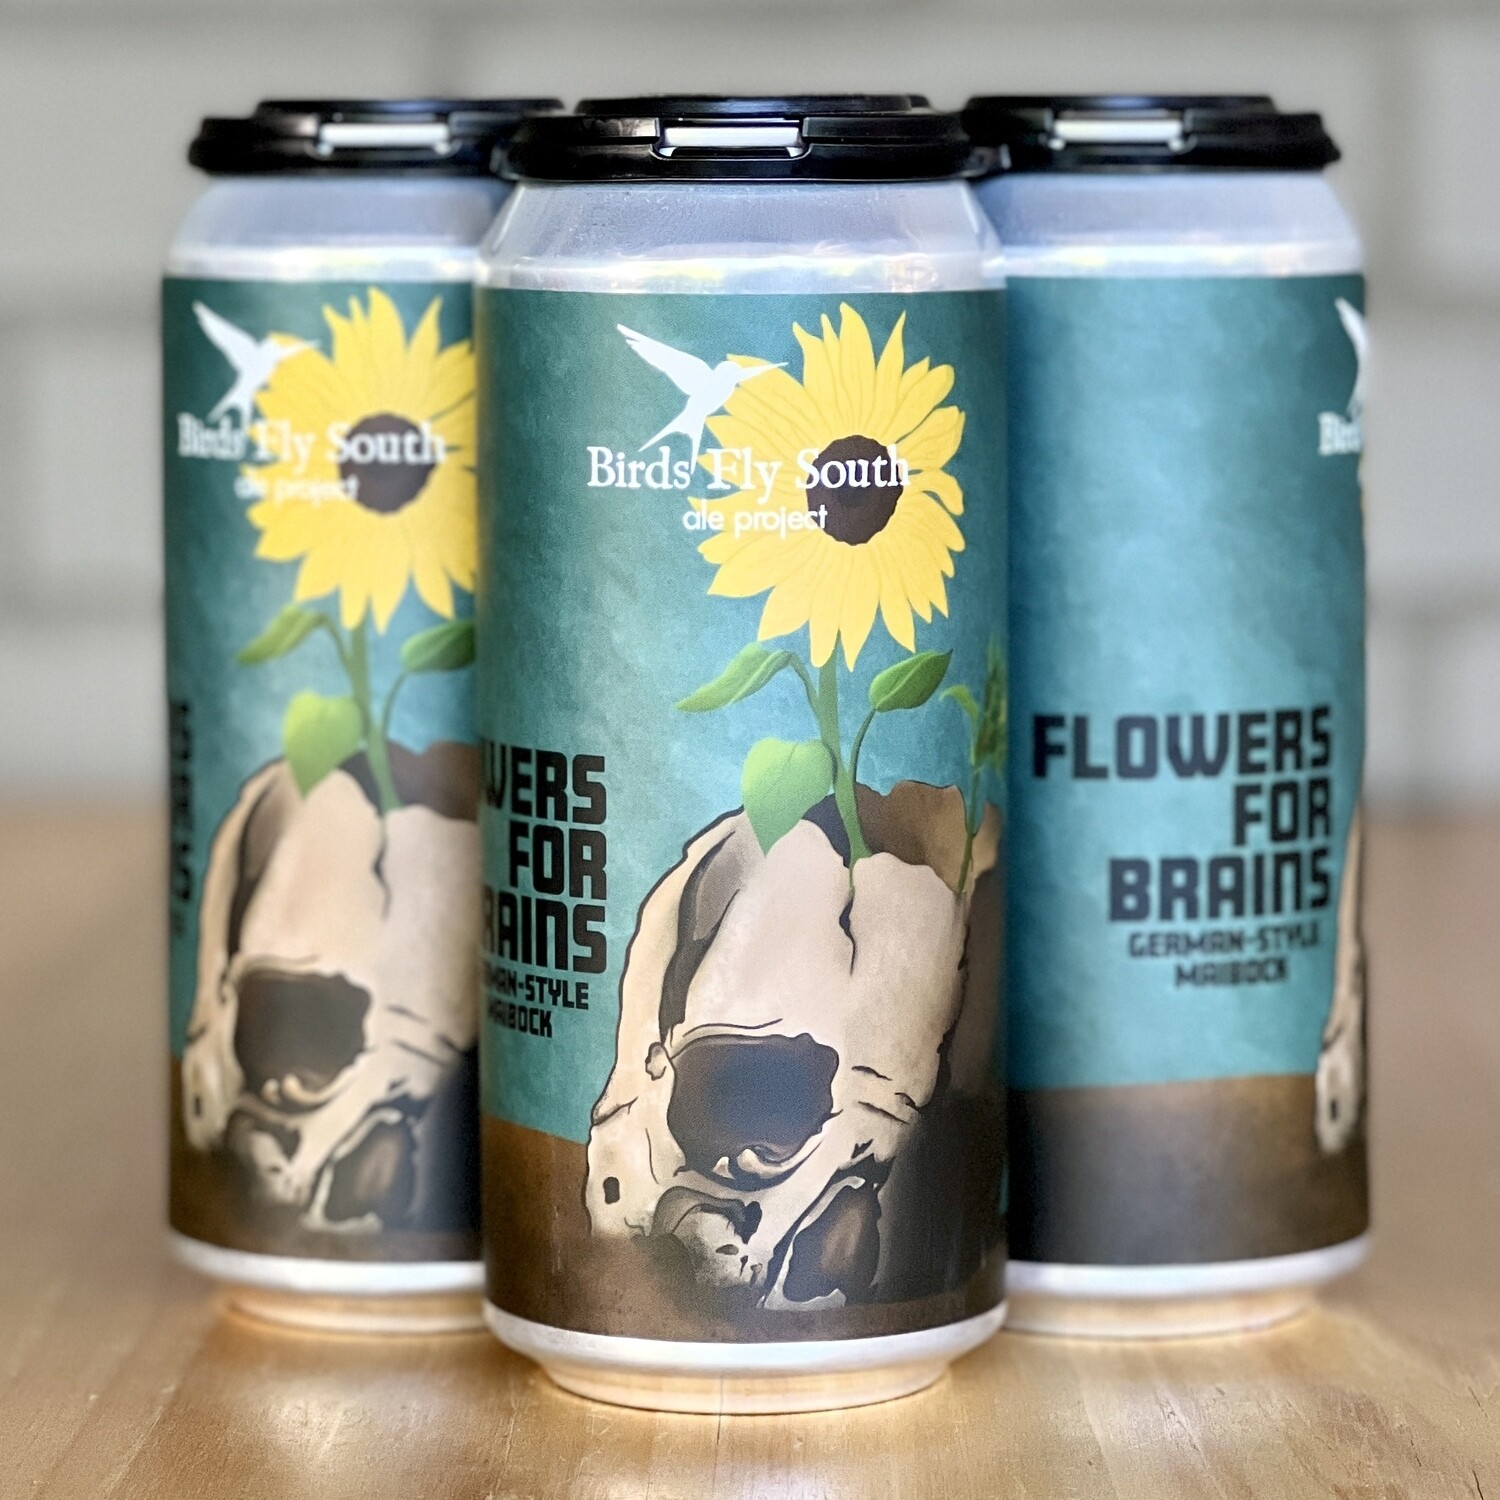 Birds Fly South Flowers For Brains (4pk)